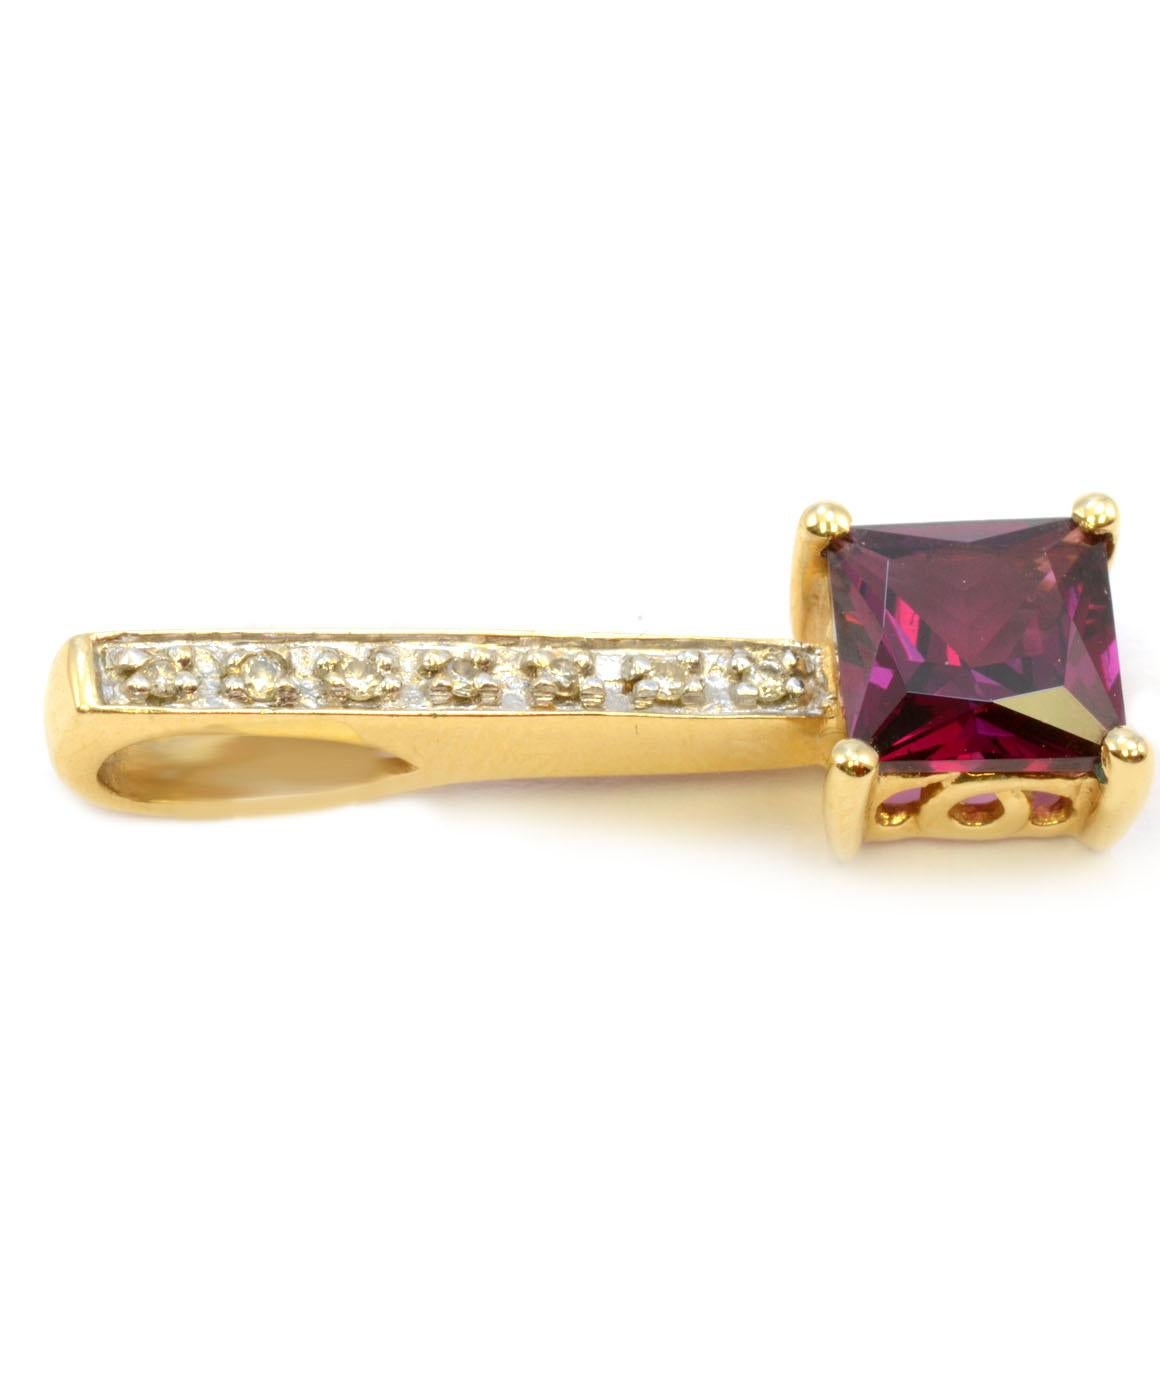 Solid 14K Yellow Gold Genuine Garnet & Diamond Pendant 1.5g
Excellent condition. This solid 14k yellow gold pendant features a square garnet that measures approximately 6.24mm X 6.24mm. There are 7 natural diamonds that weigh approximately 0.005ct